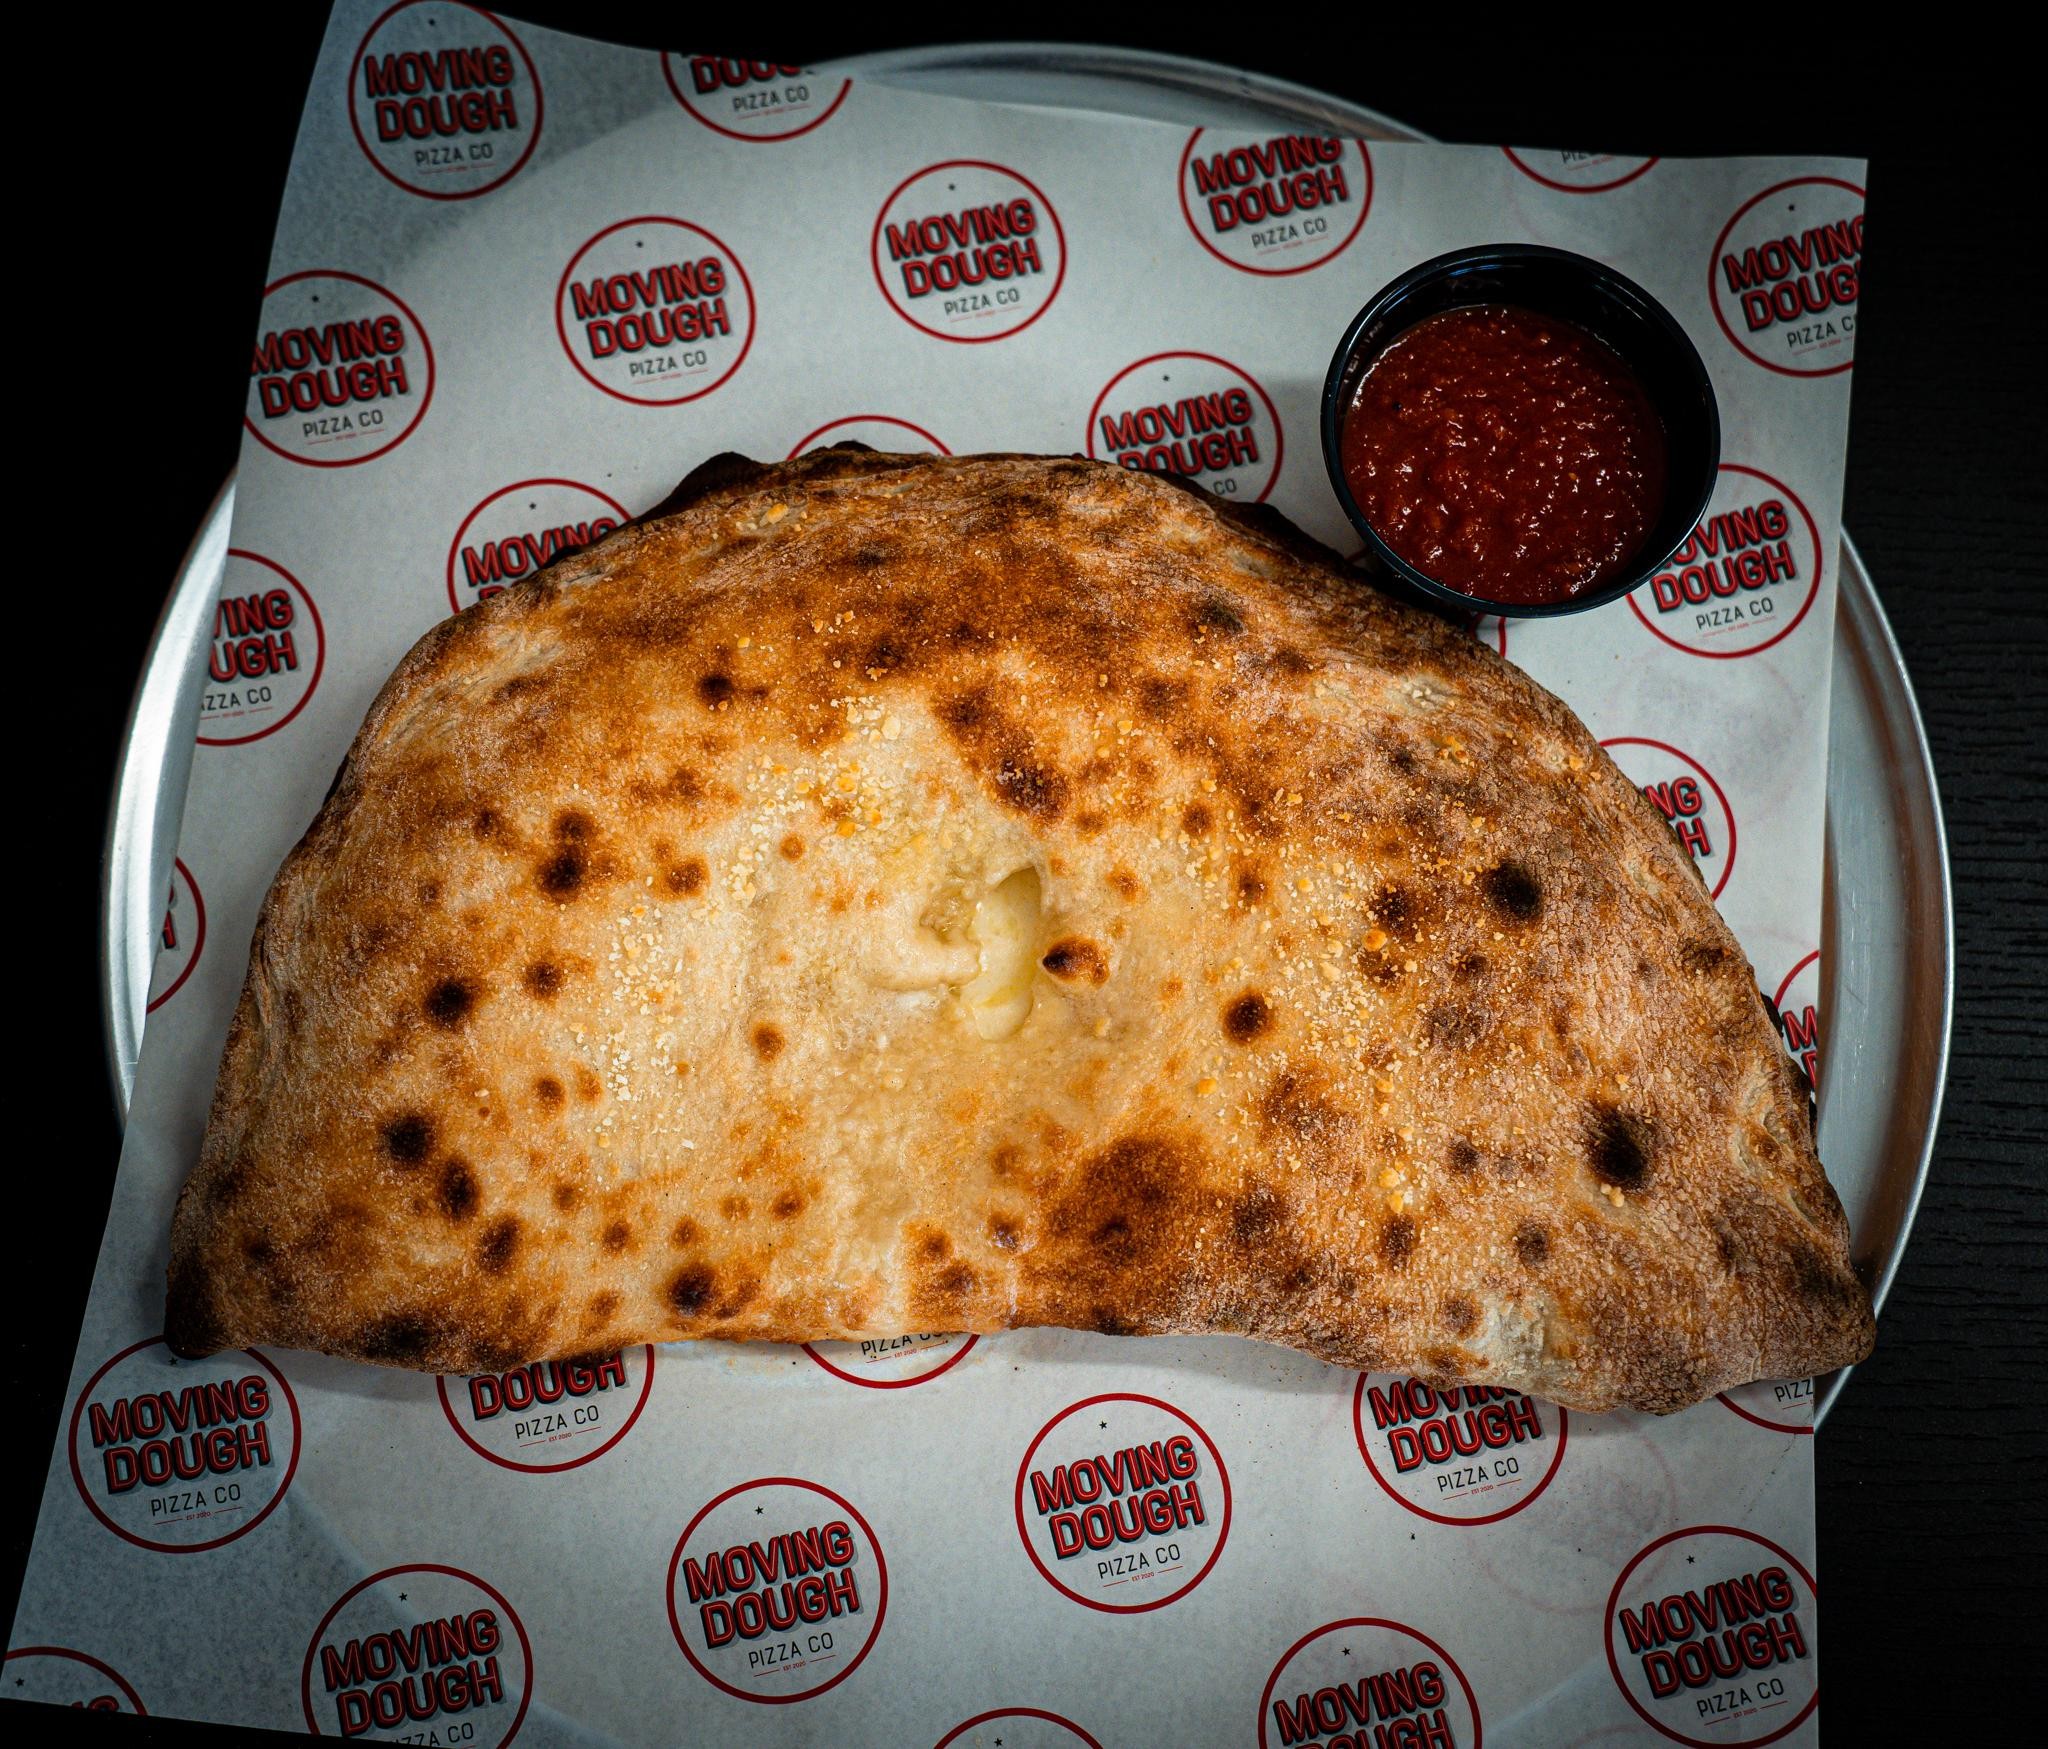 The Oliver Calzone